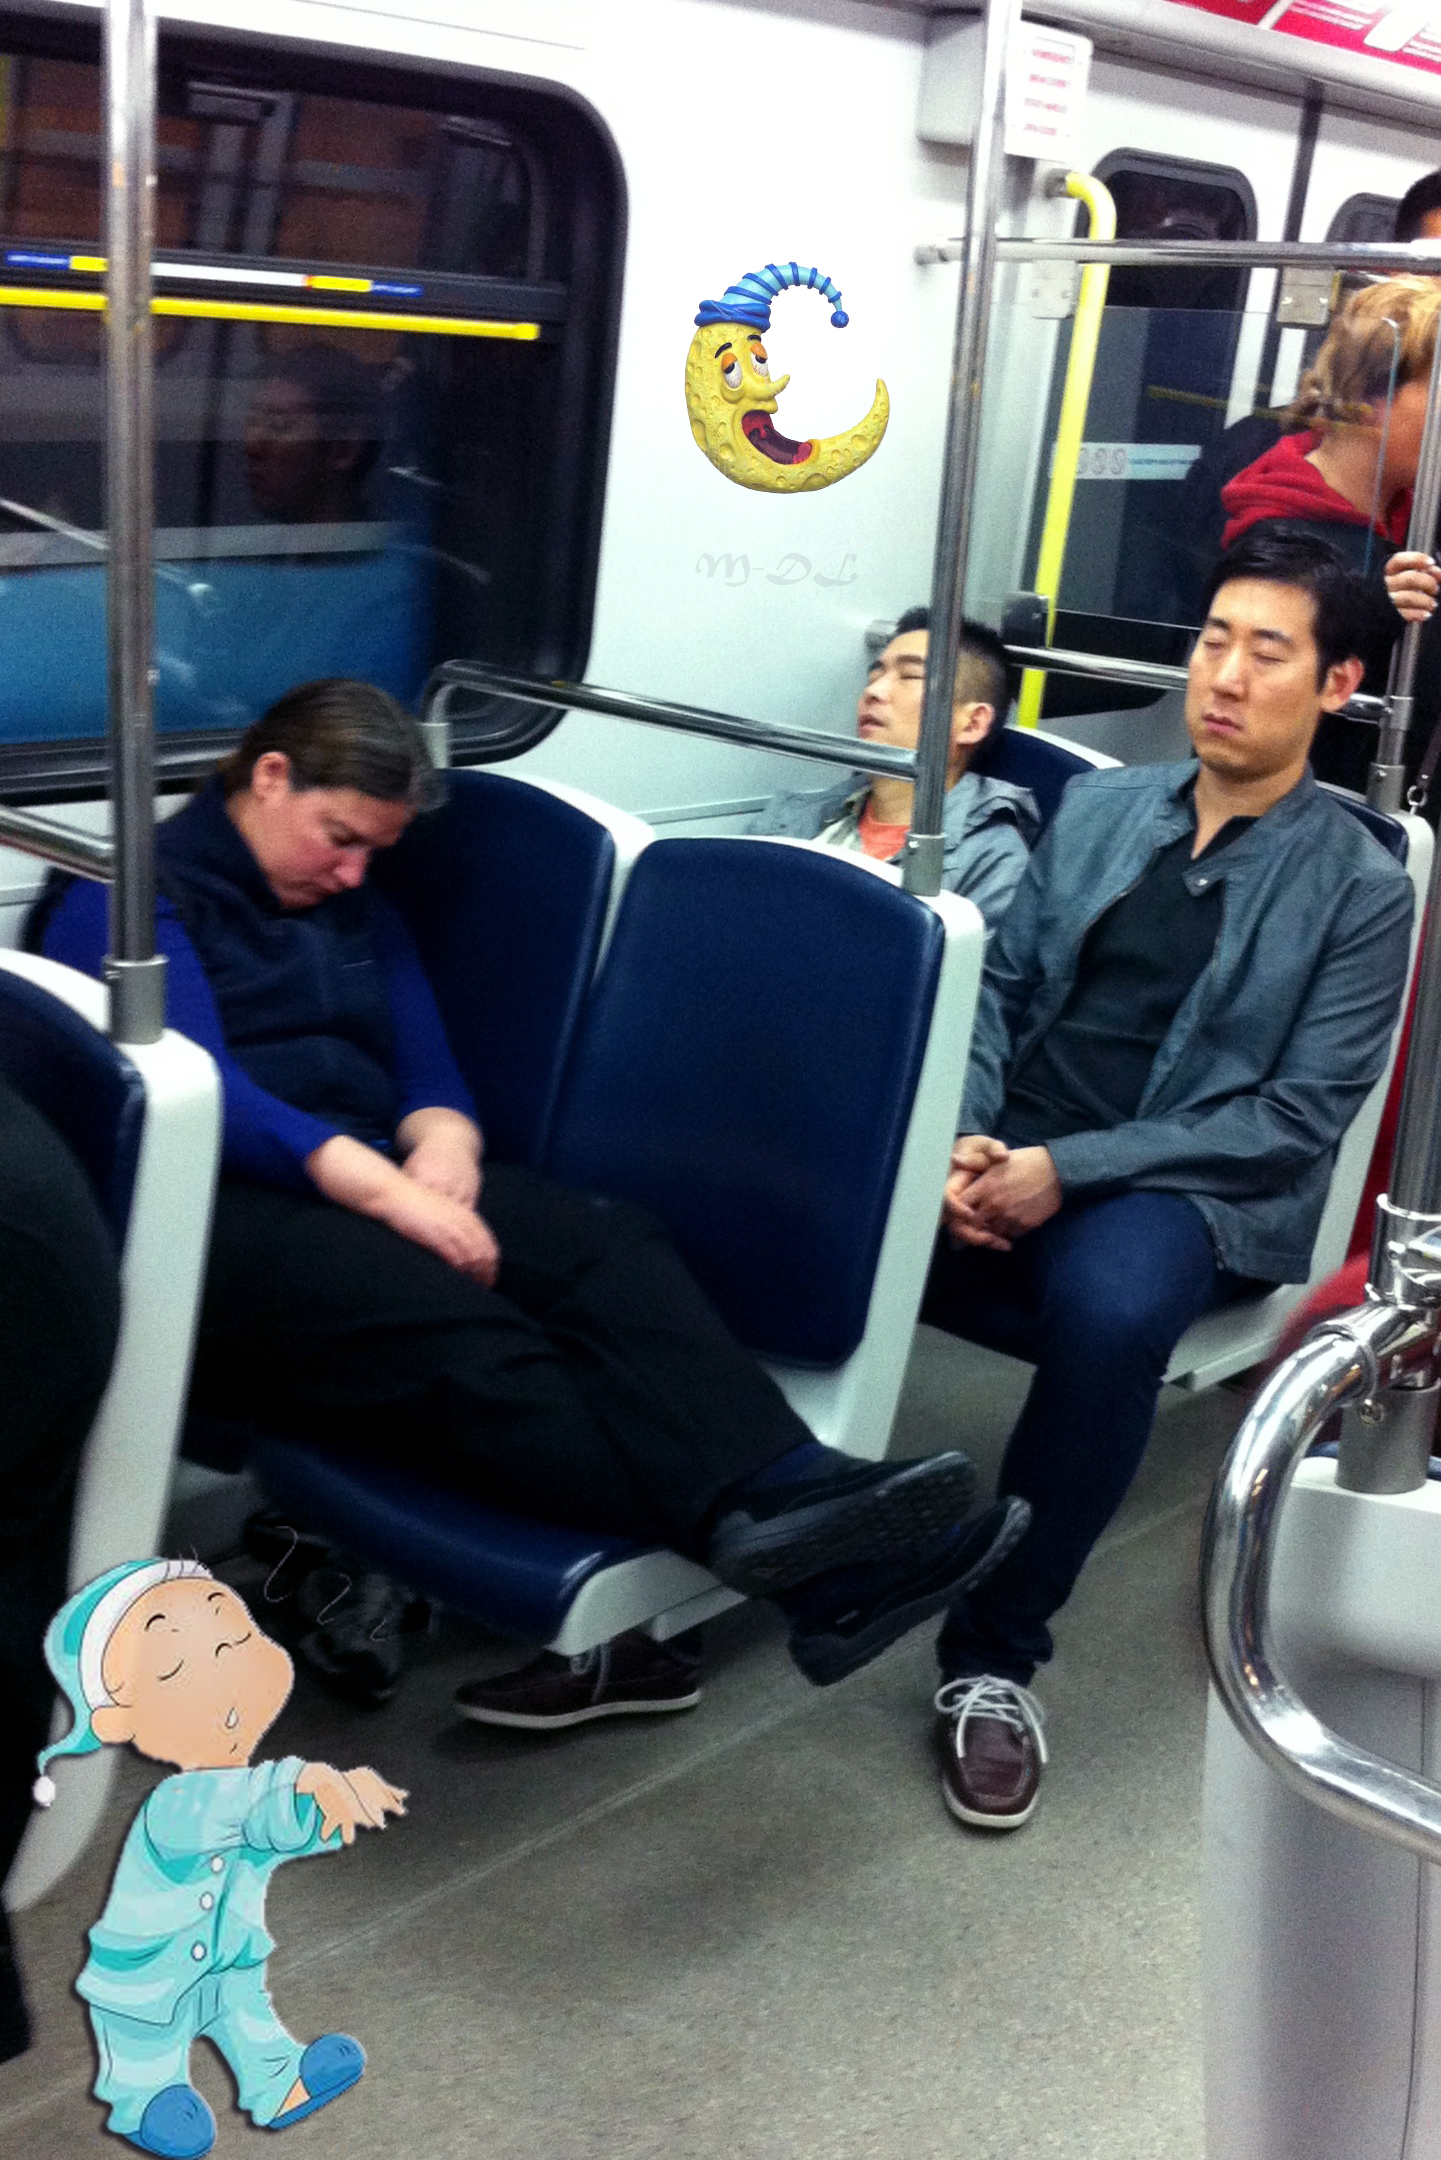 Tired and passed out commuters on late night skytrain